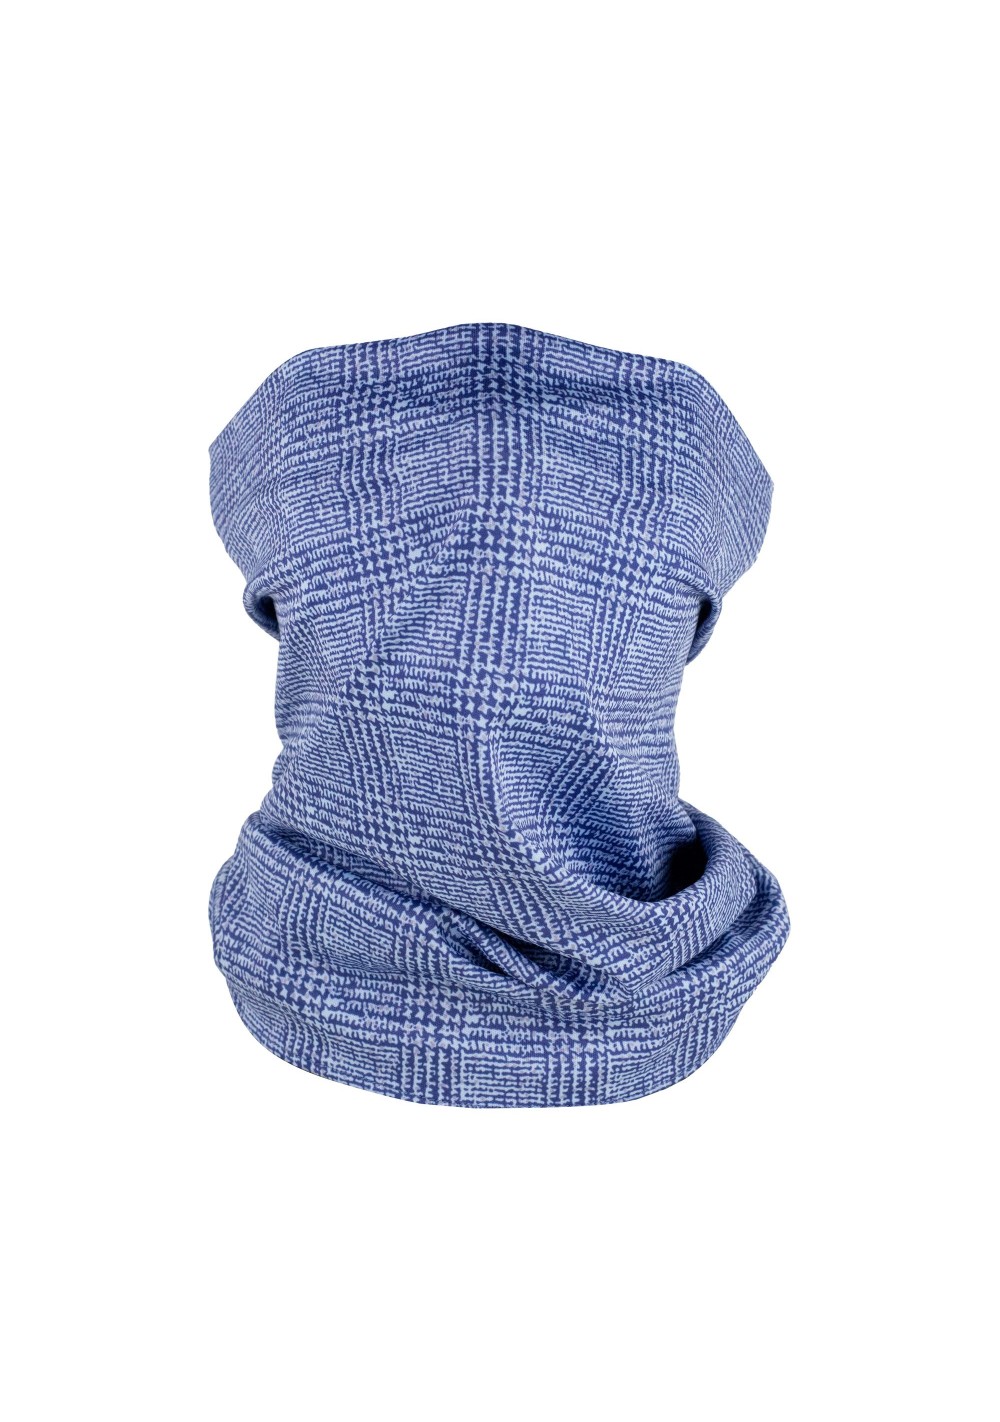 blue prince of wales check neck gaiter